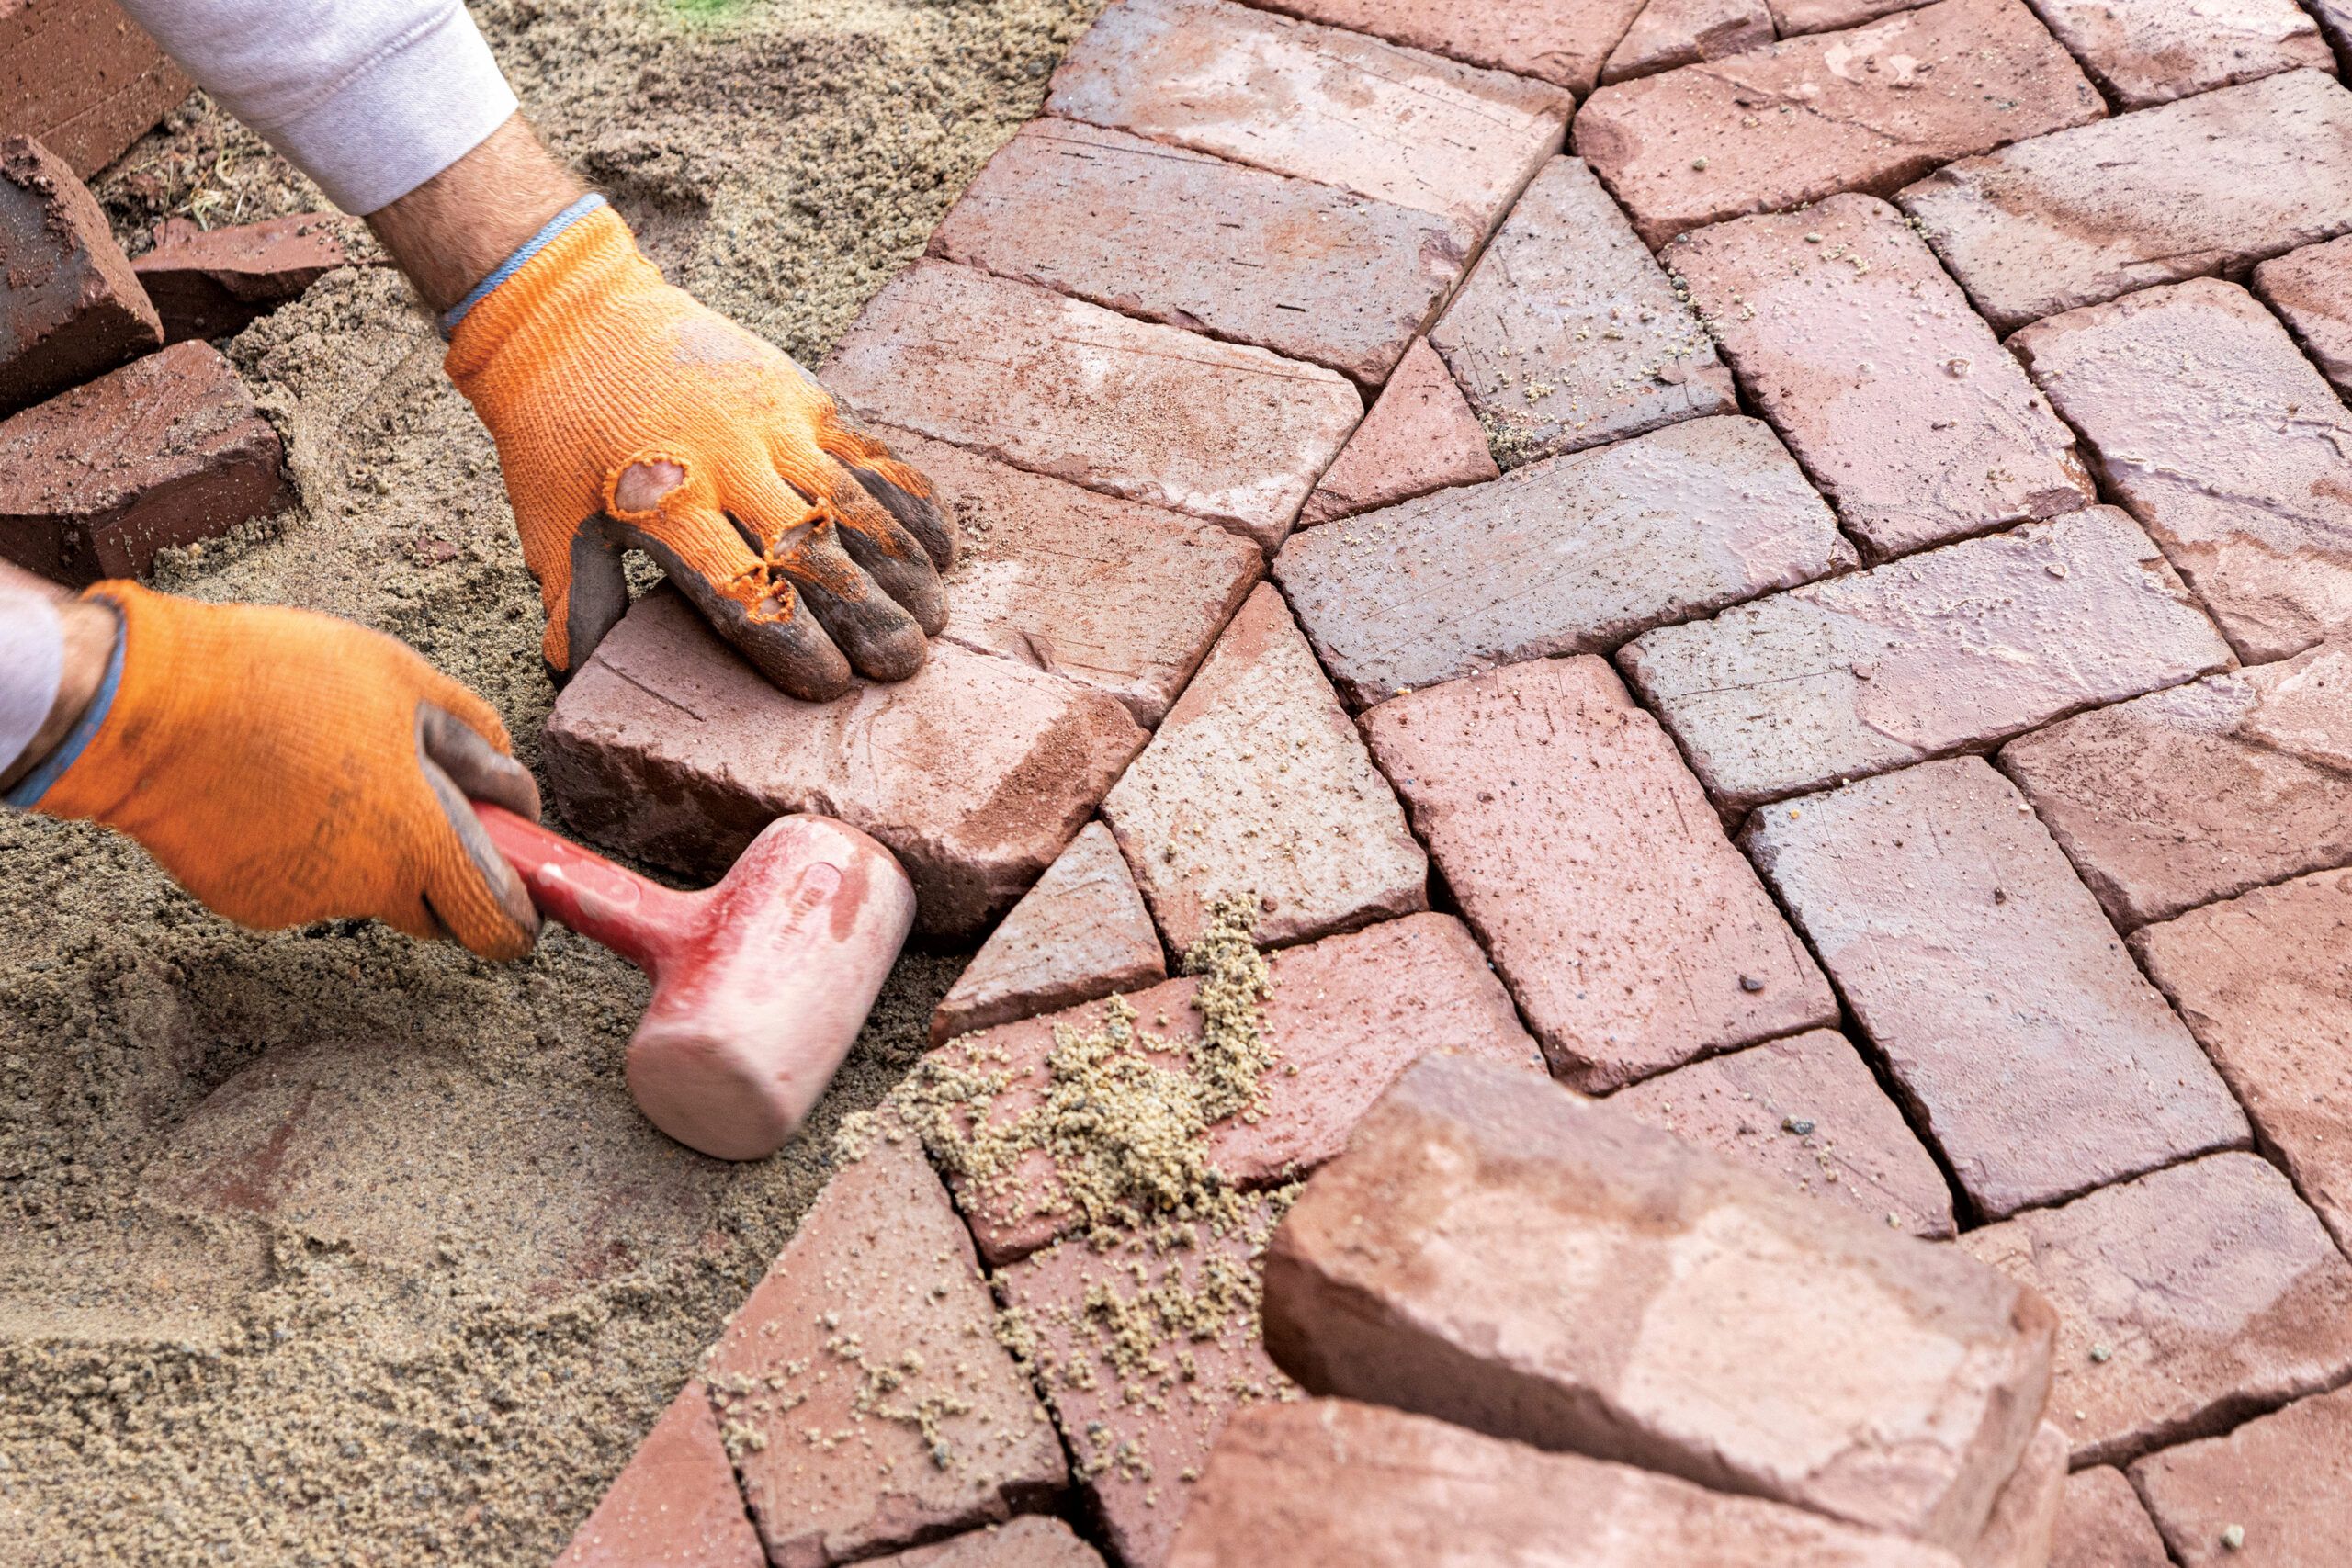 The Ultimate Clay Bricks Guide  Types, Colours, Sizes and More Explained